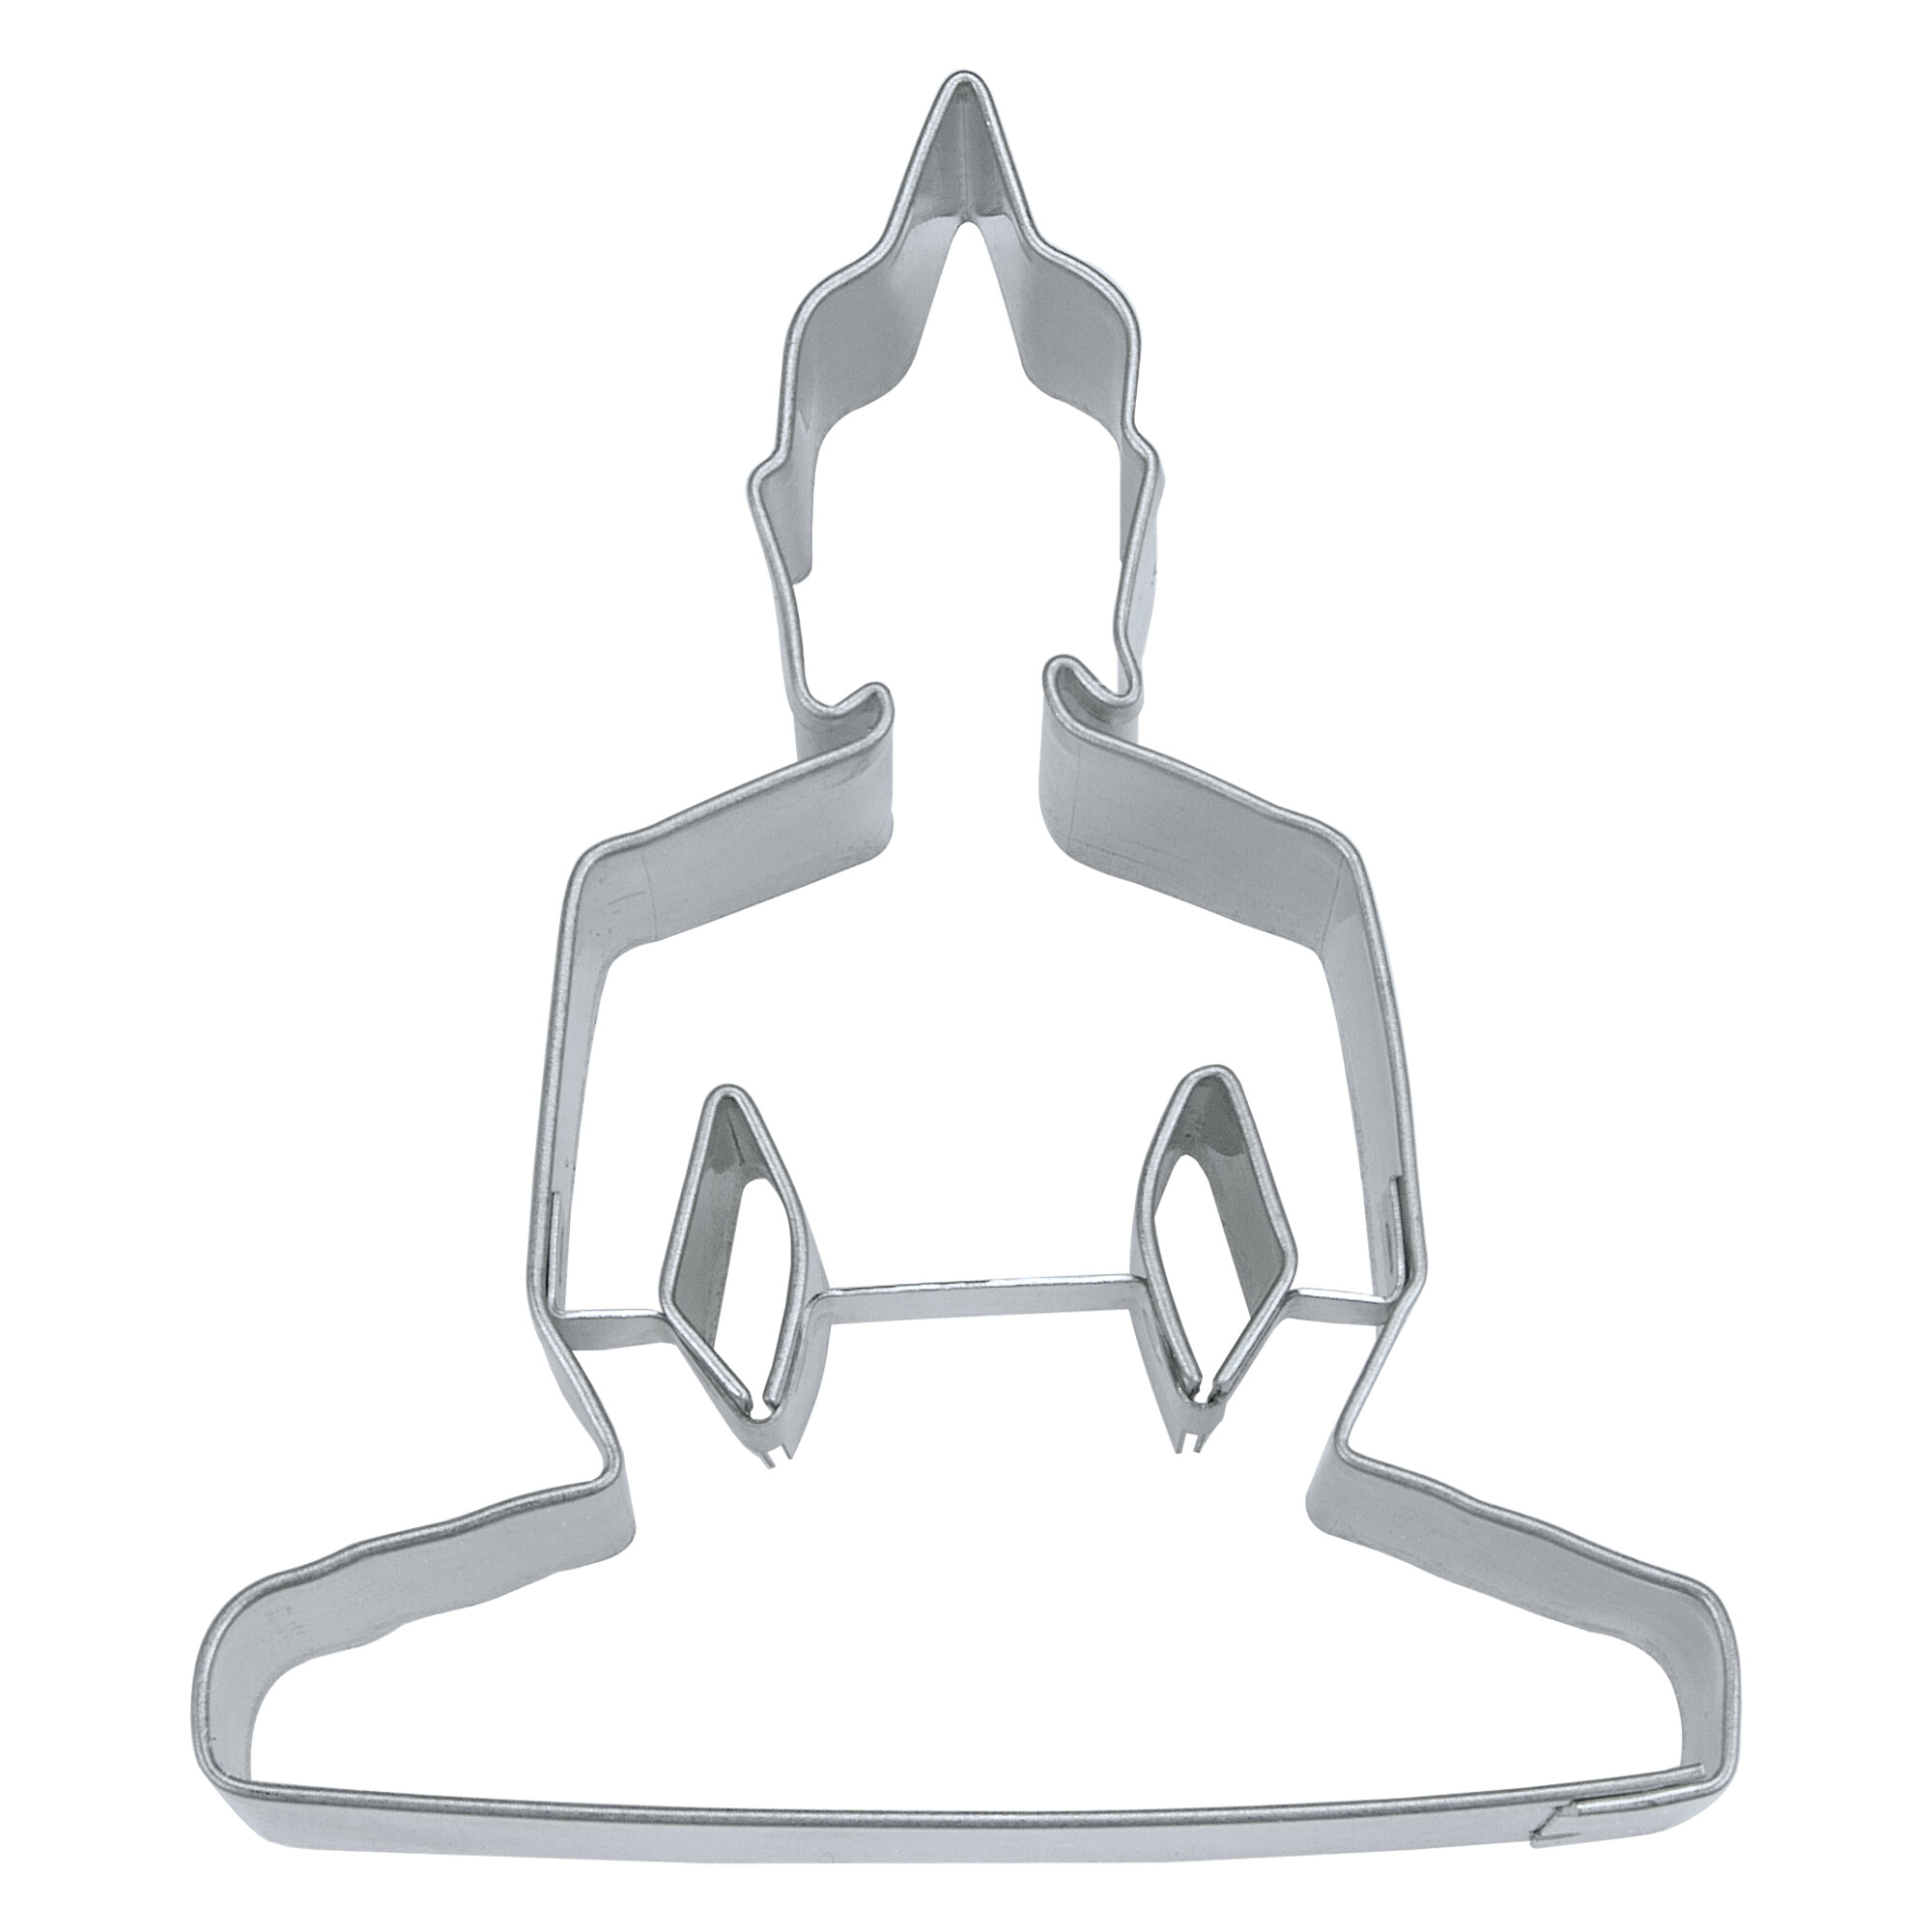 Cookie cutter with stamp – Buddha